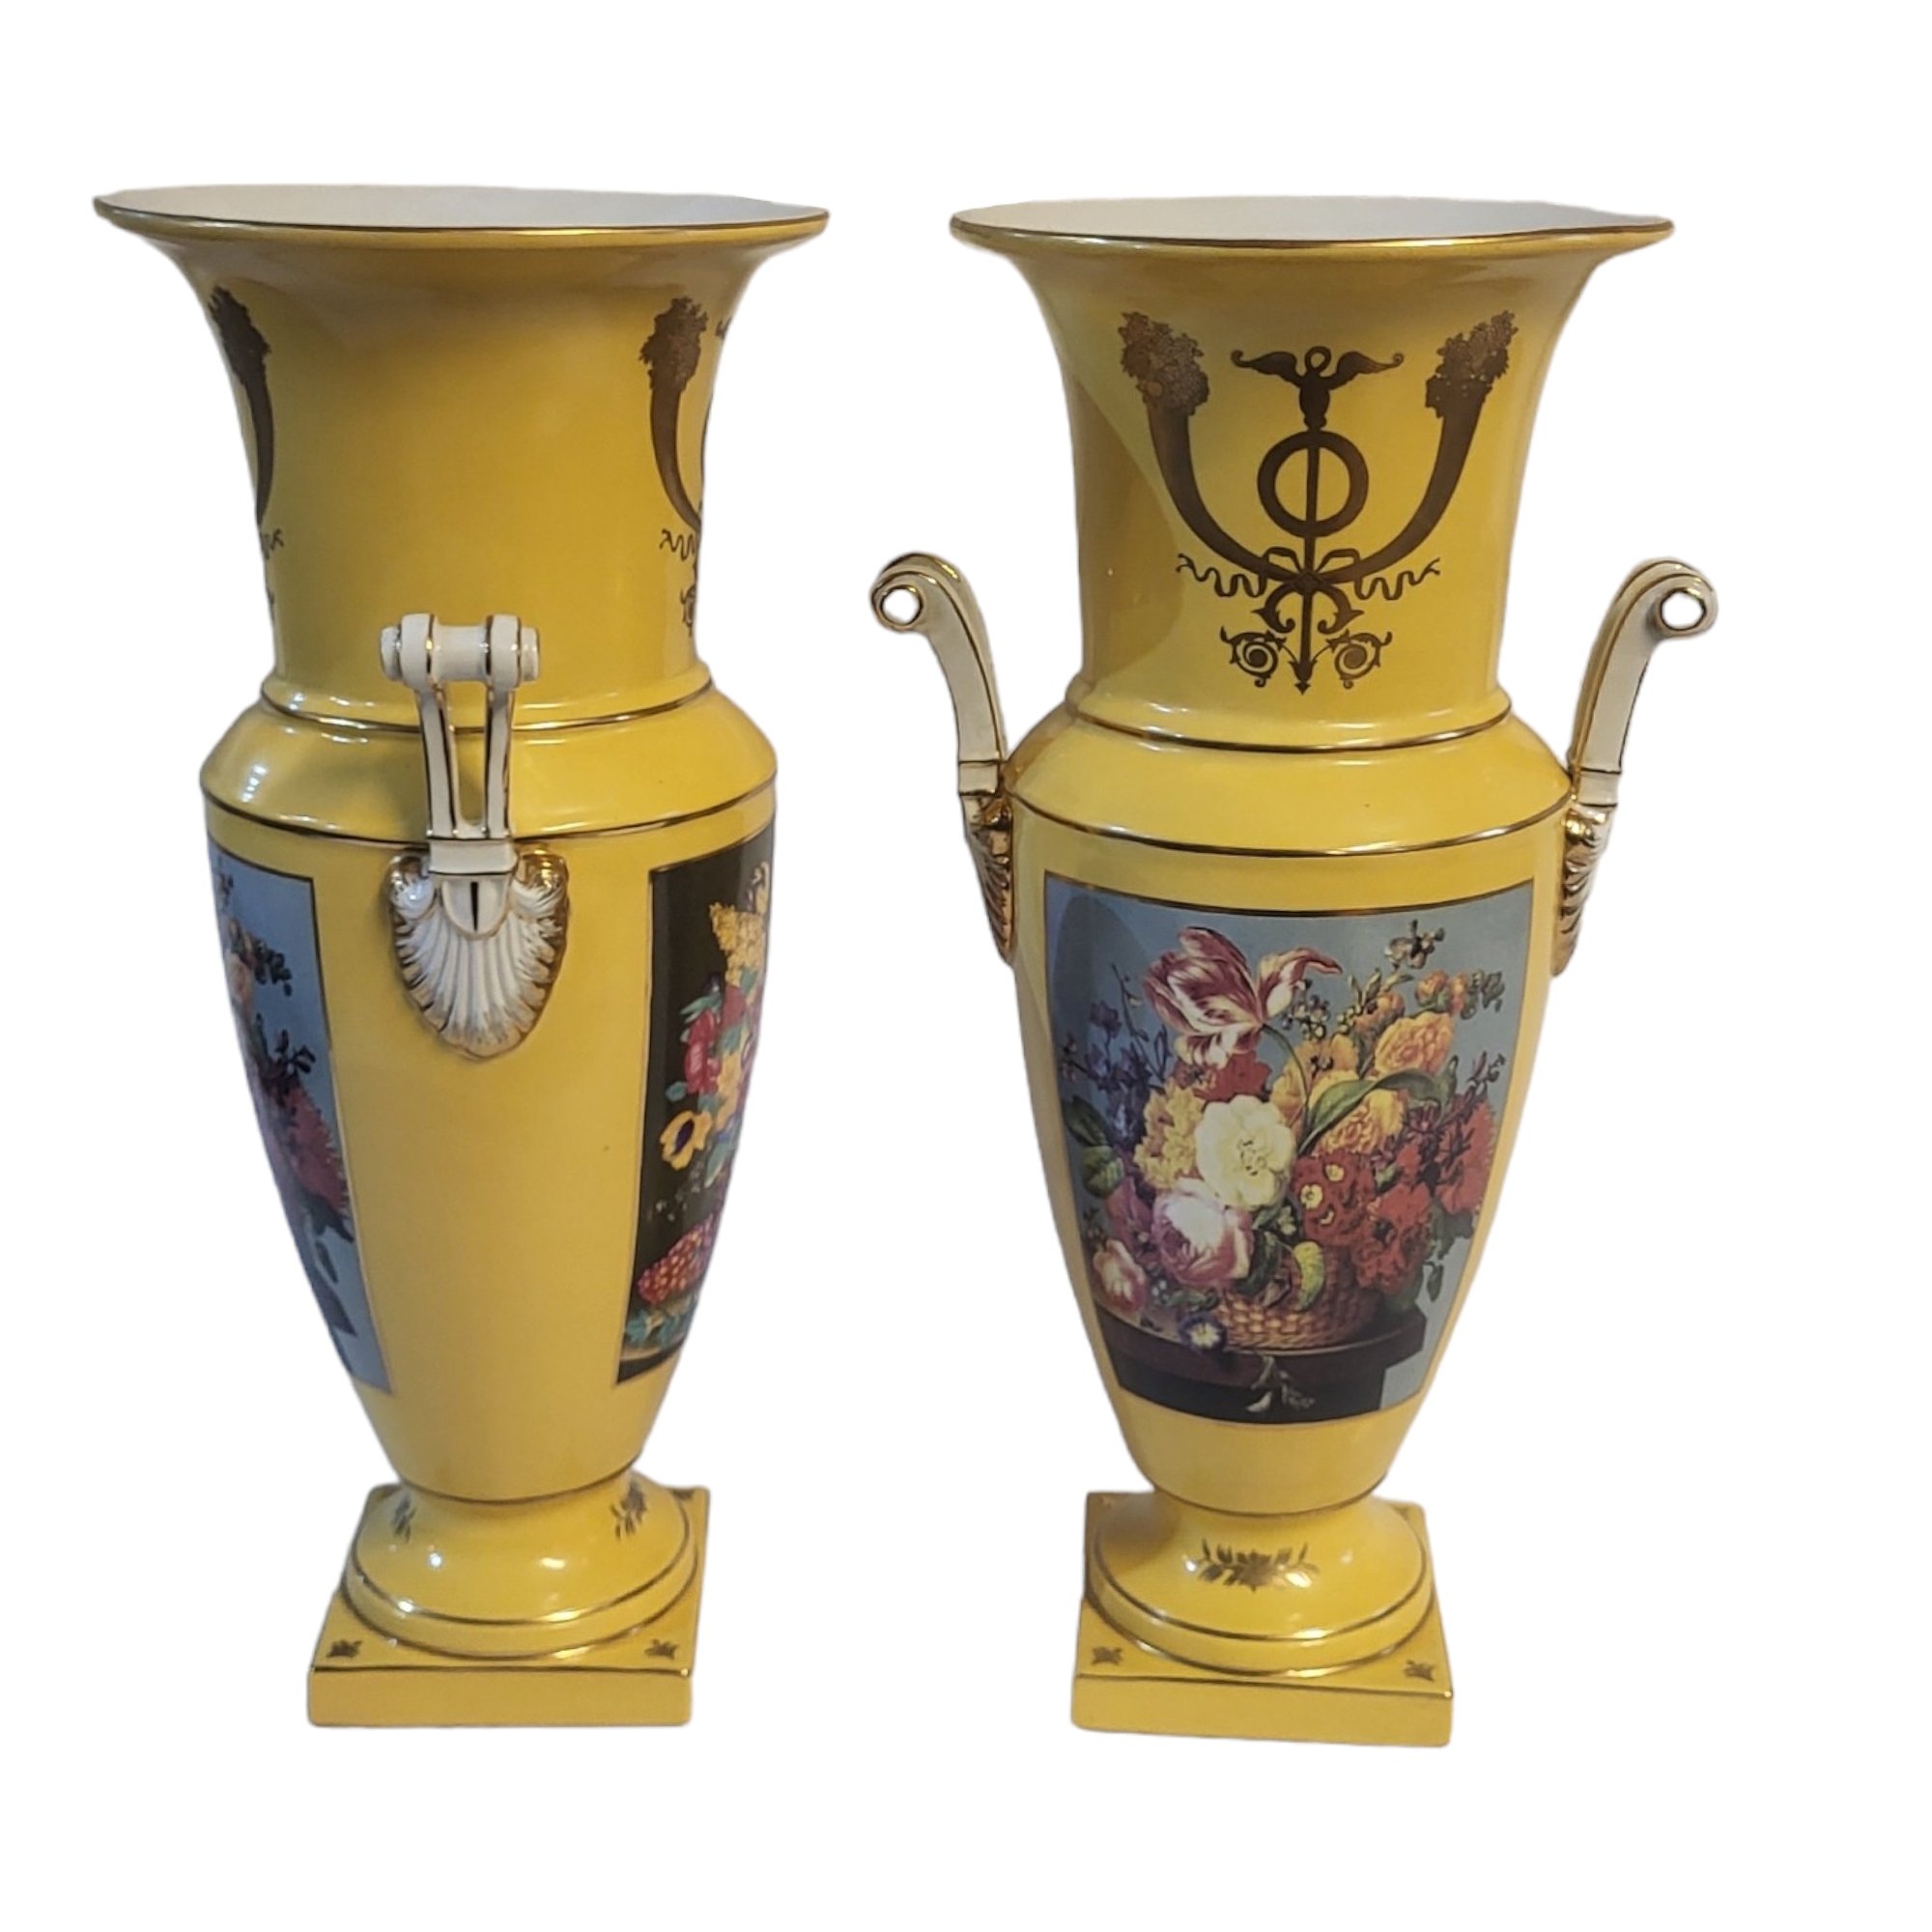 A PAIR OF YELLOW SEVRÈS STYLE CERAMIC VASES Gilt edging and panels with floral imagery on a tapering - Image 2 of 4